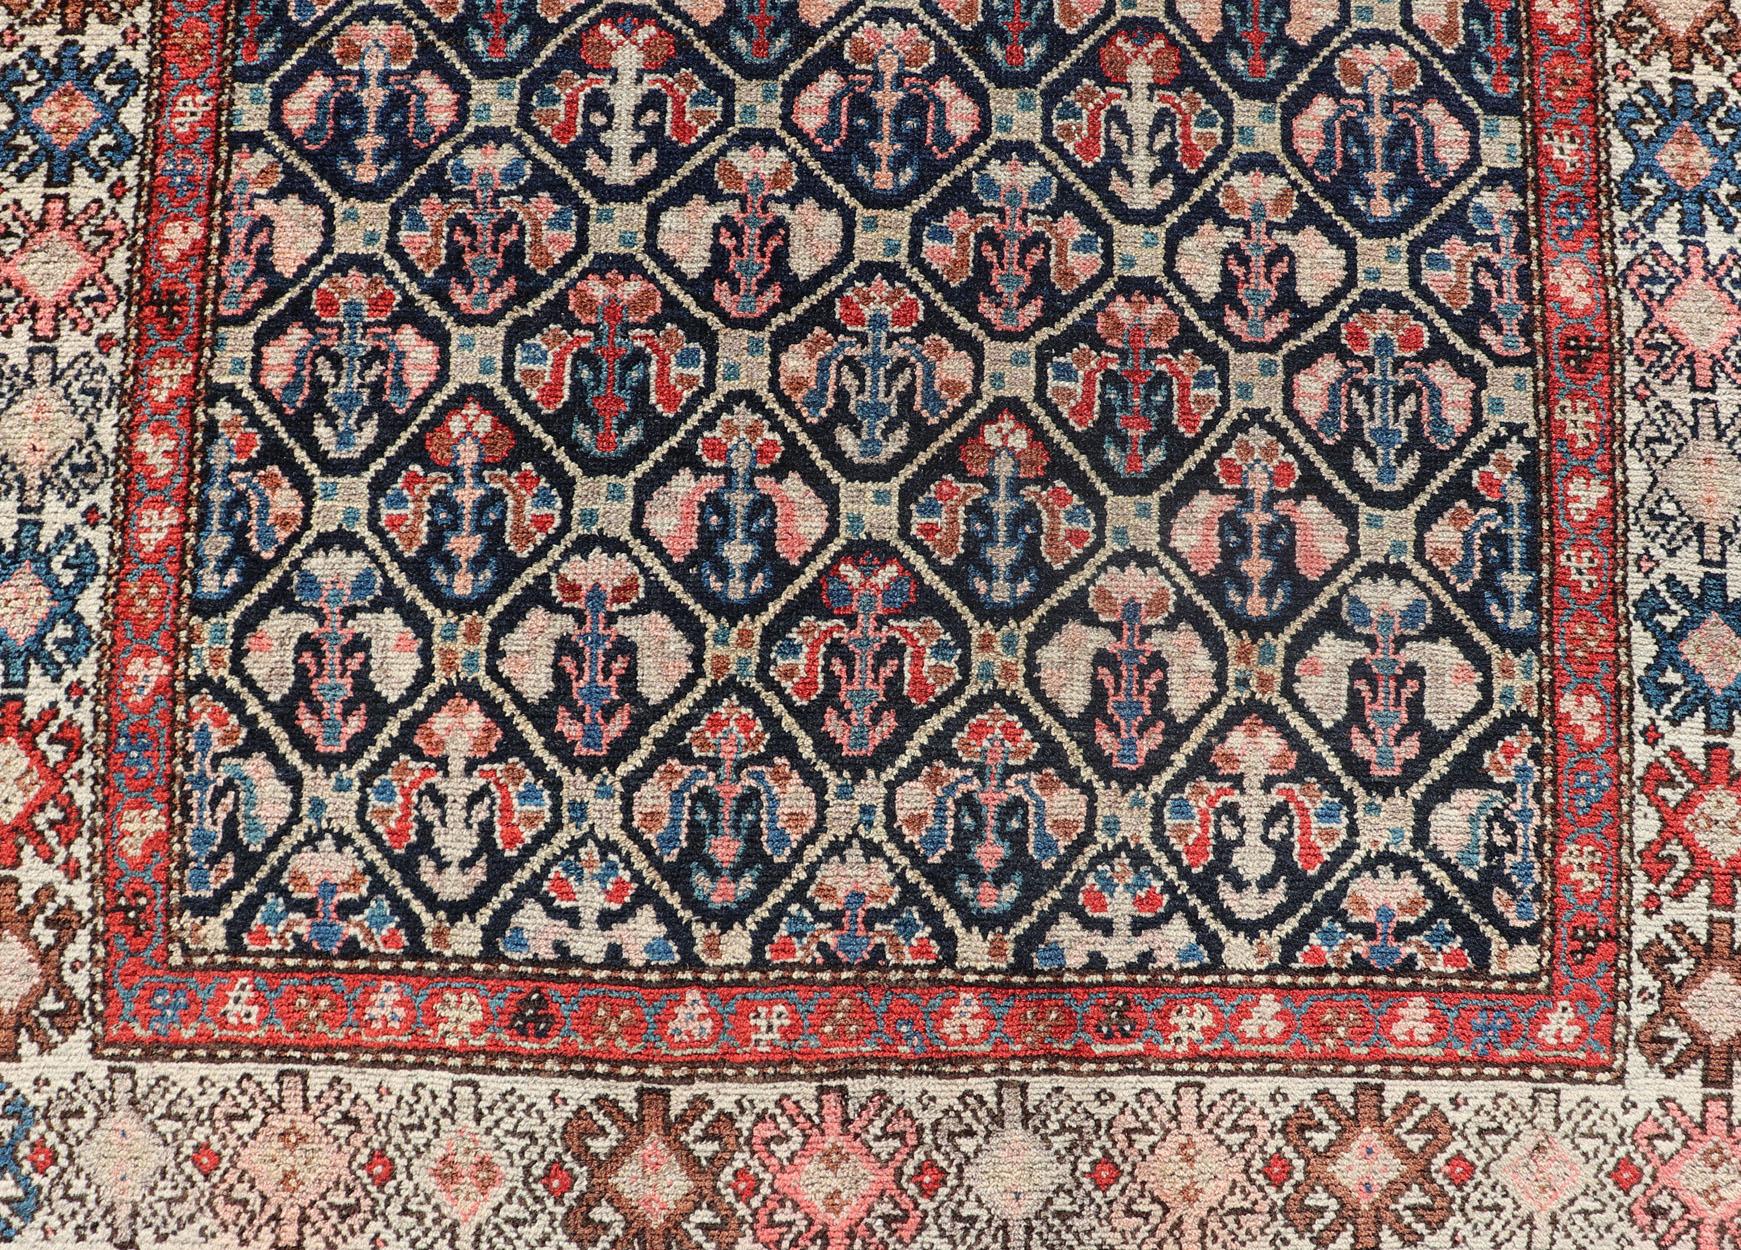 Tribal Persian Antique Hamedan Fine Rug in Blue, Red, Brown, and Ivory In Good Condition For Sale In Atlanta, GA